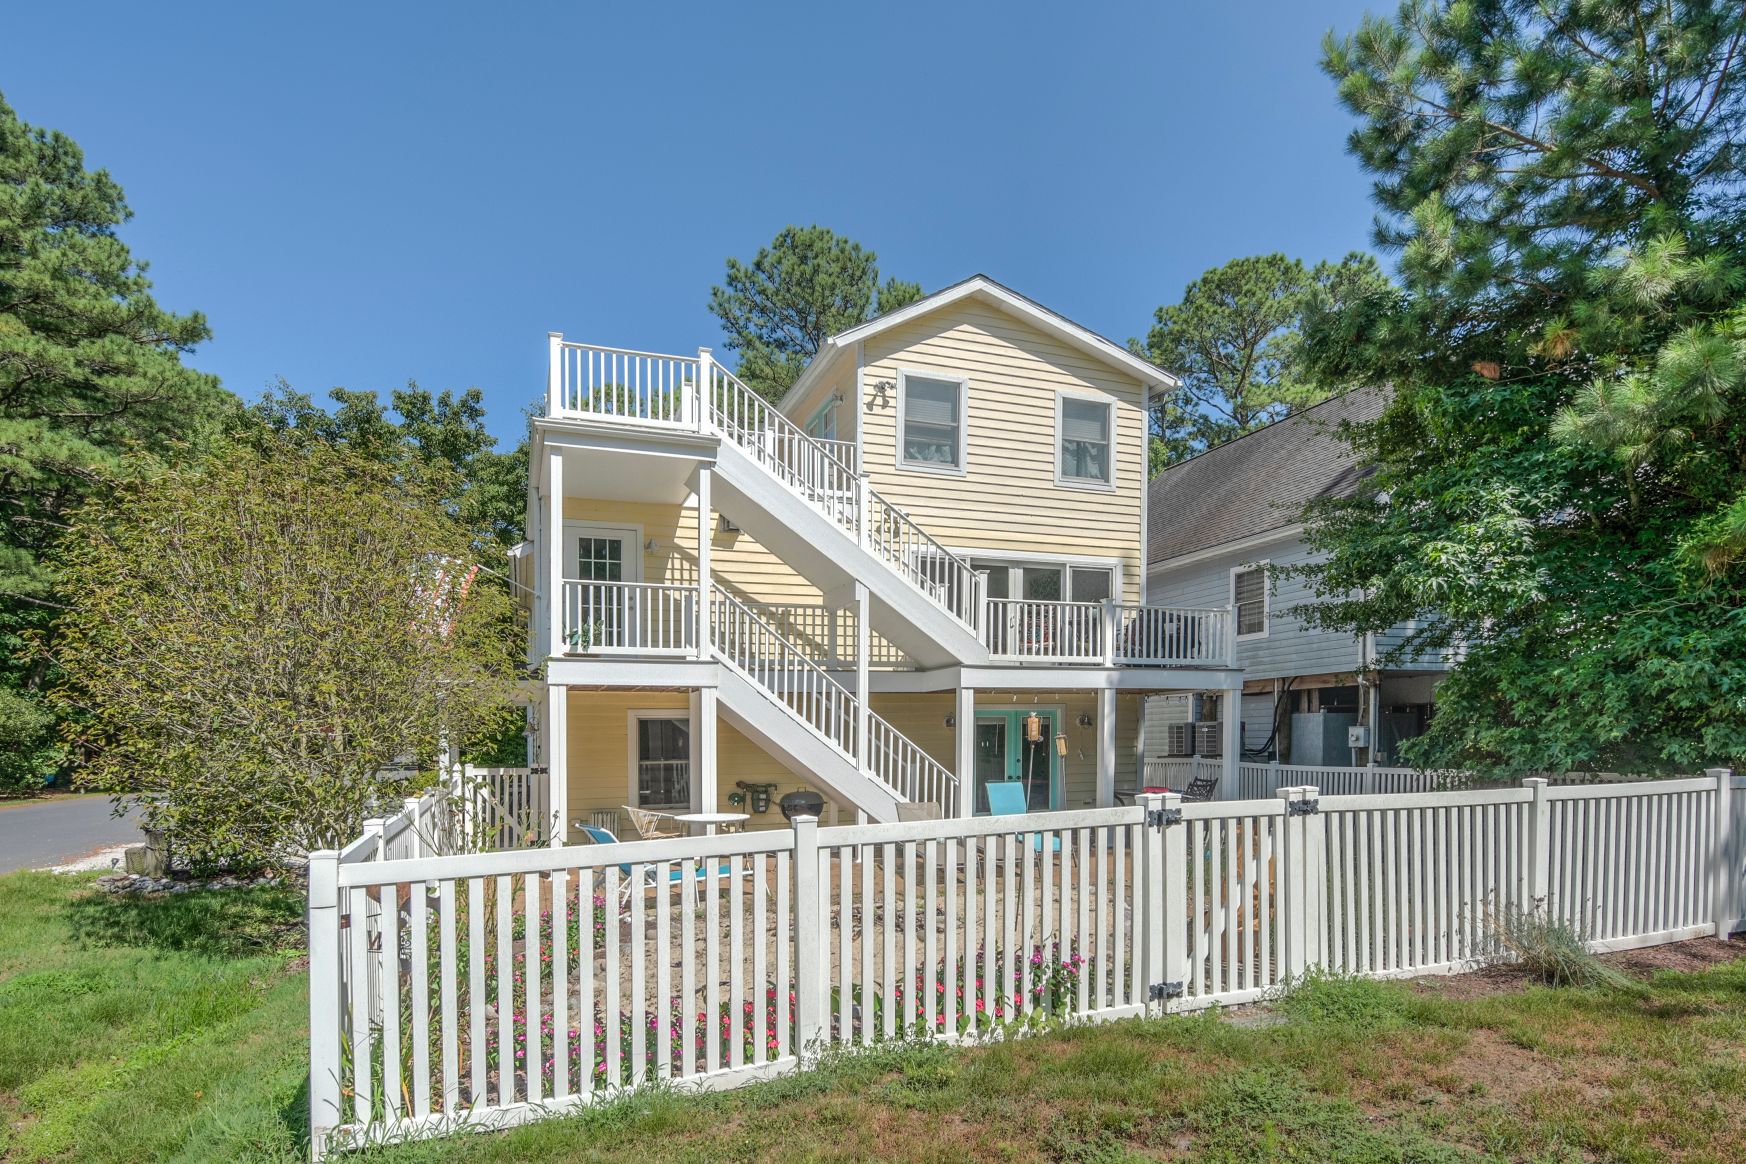 Deck Addition in Canal Drive, Millsboro DE - Street View